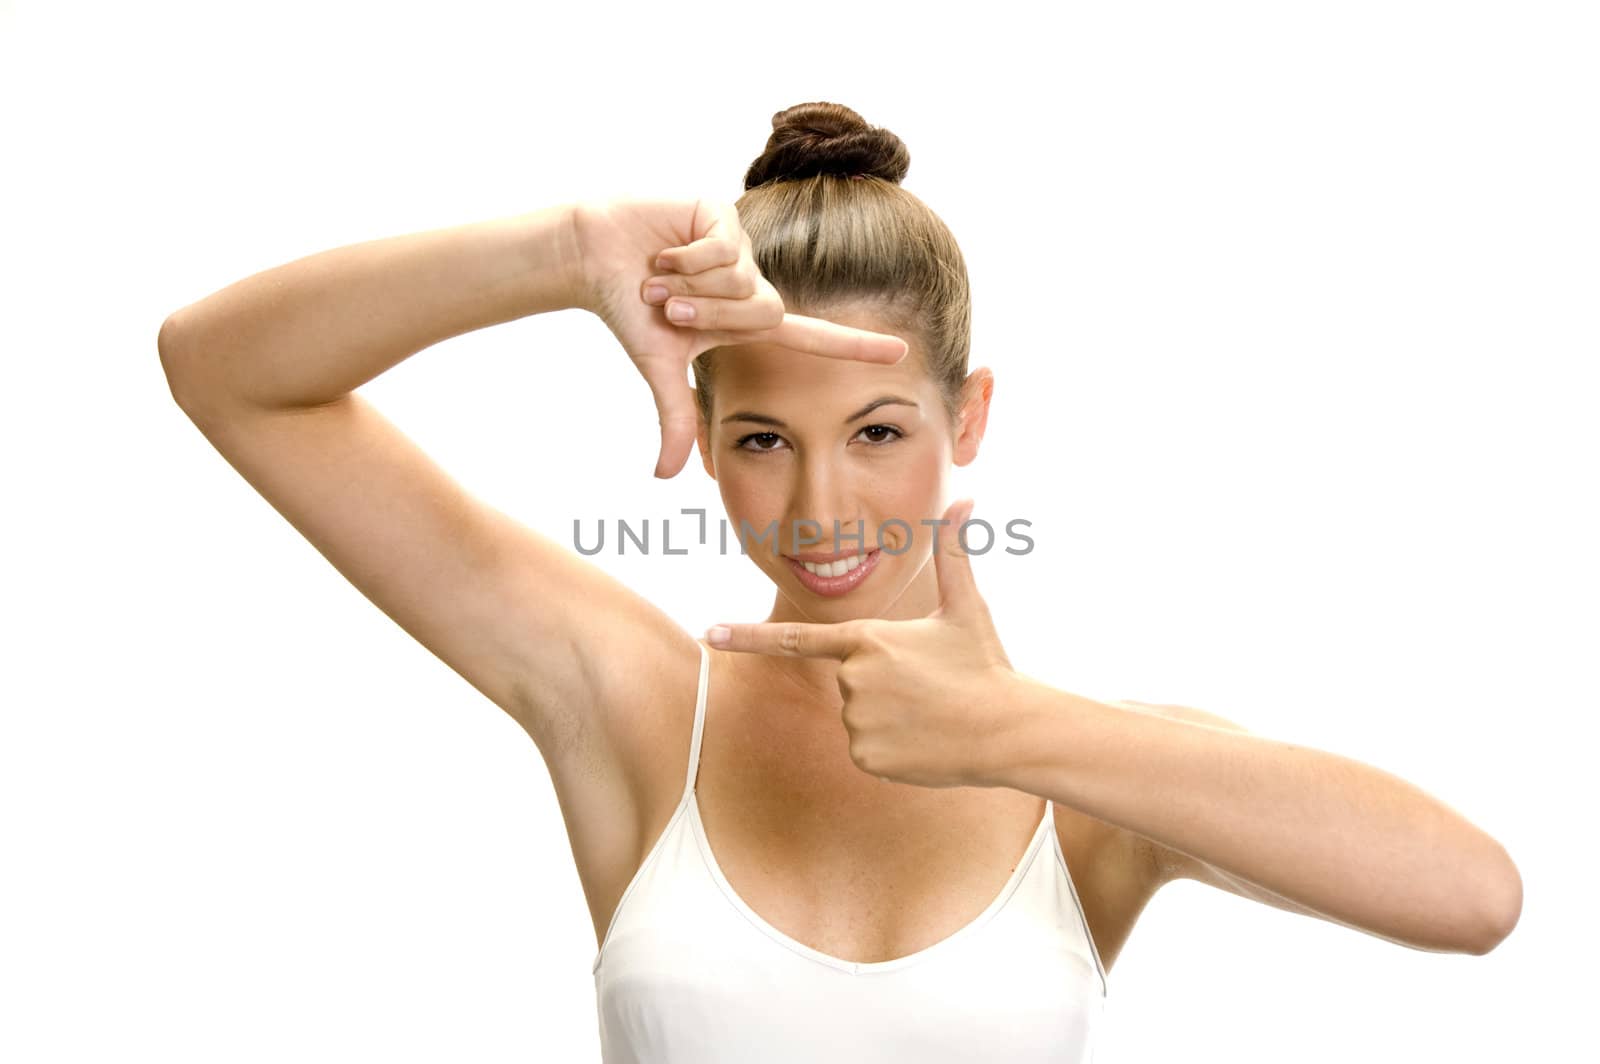 white woman showing framing hand gesture by imagerymajestic